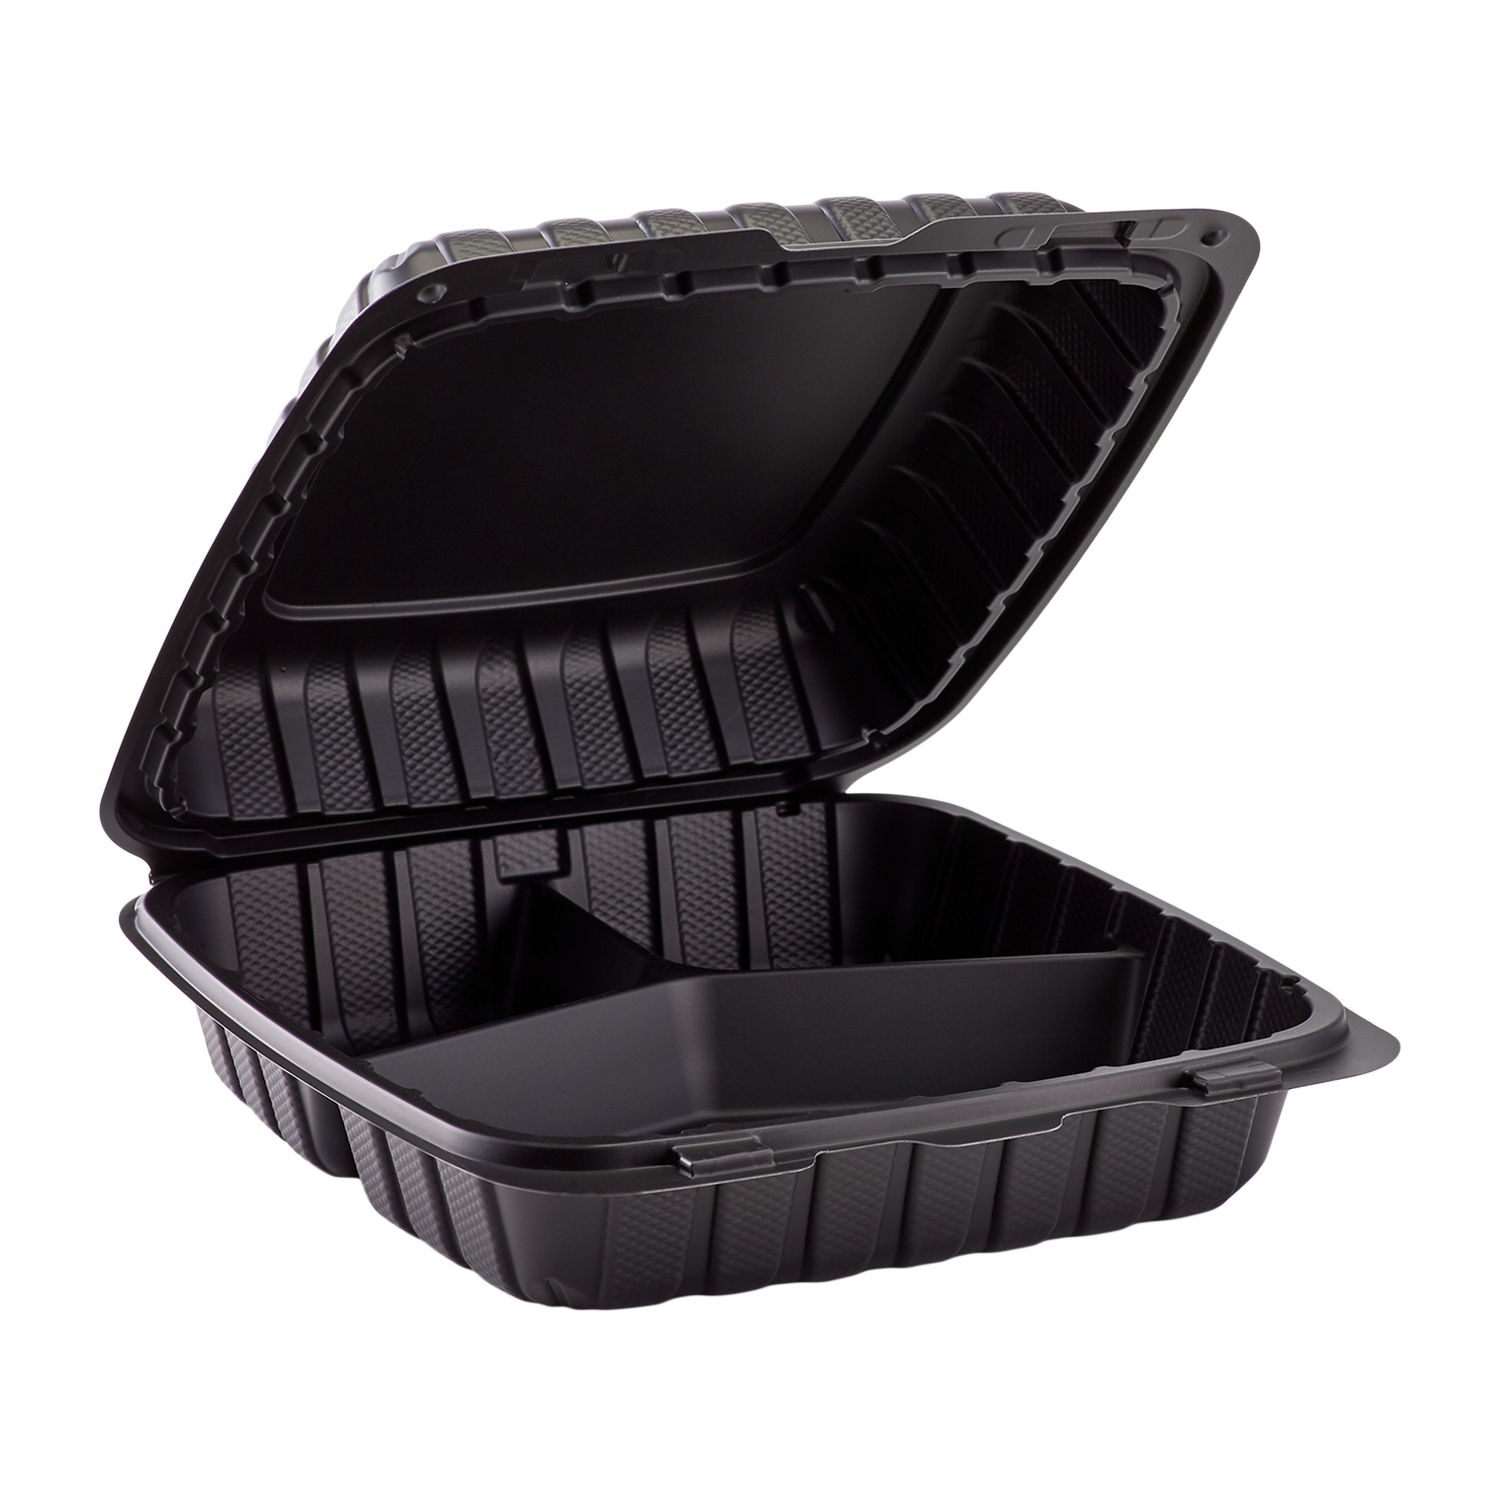 Wholesale plastic storage totes with lids,attached lid totes